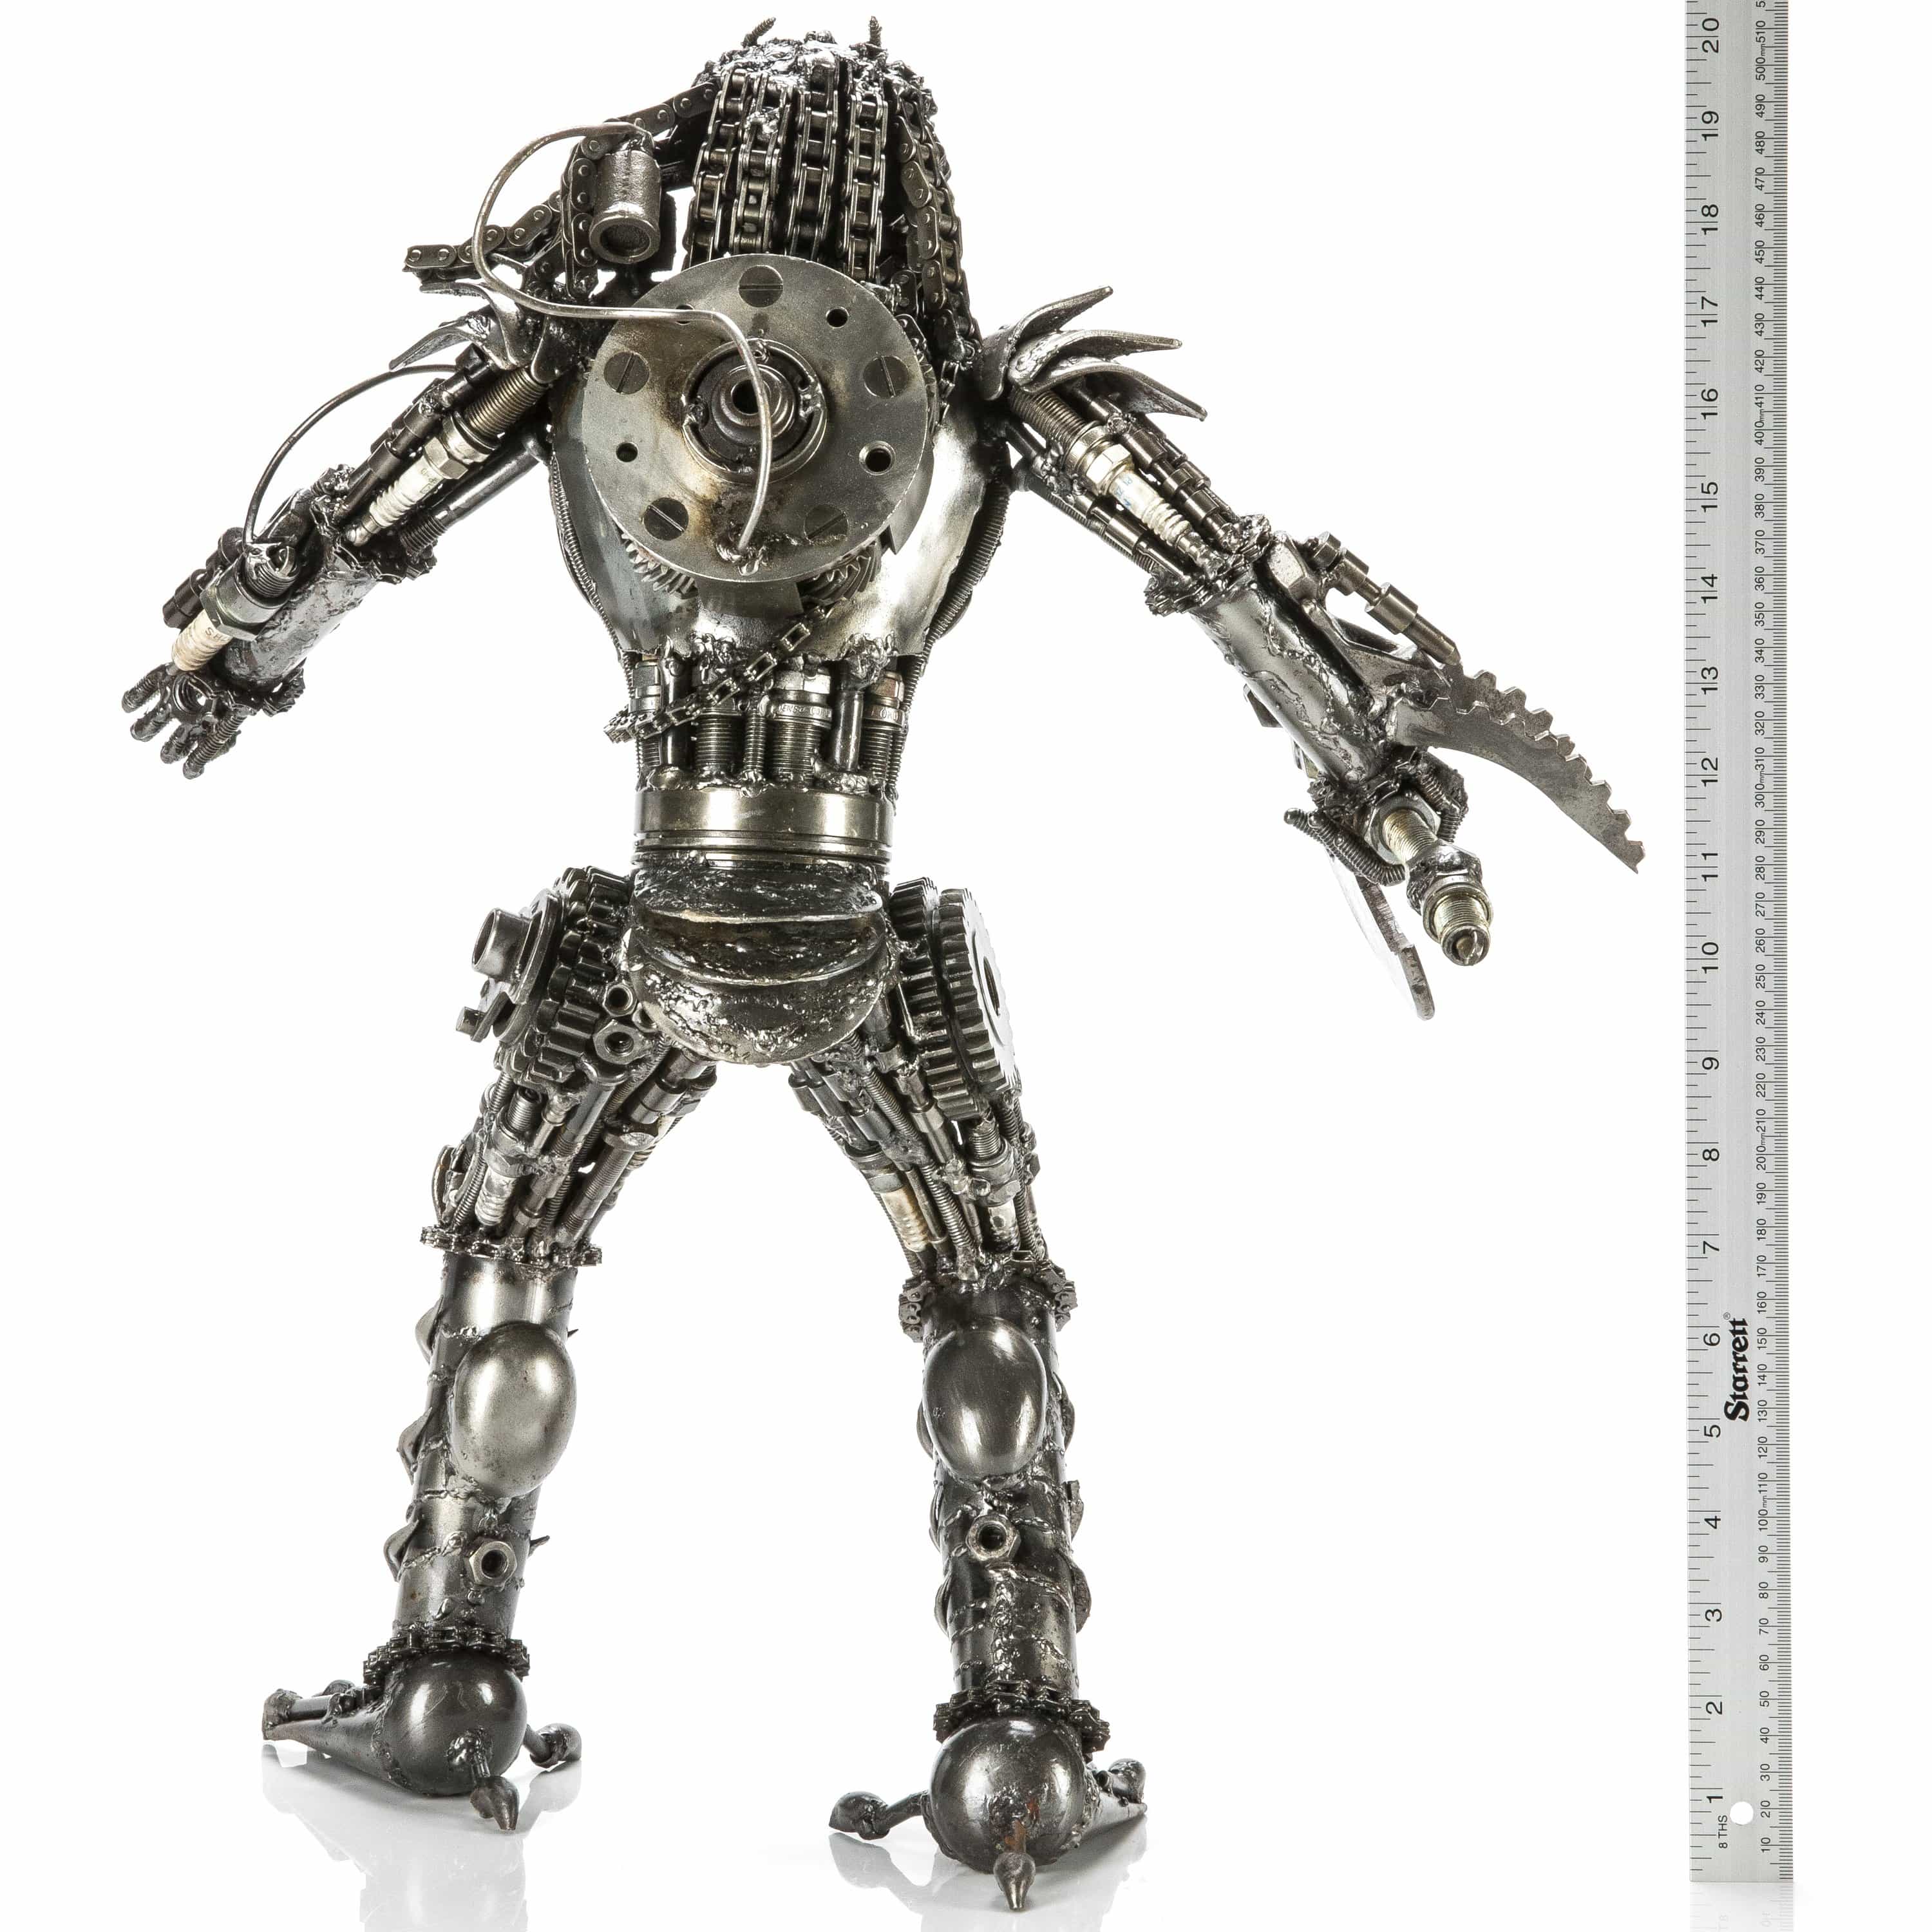 Kalifano Recycled Metal Art 23" Predator with Axe Inspired Recycled Metal Sculpture RMS-P58x41-S03